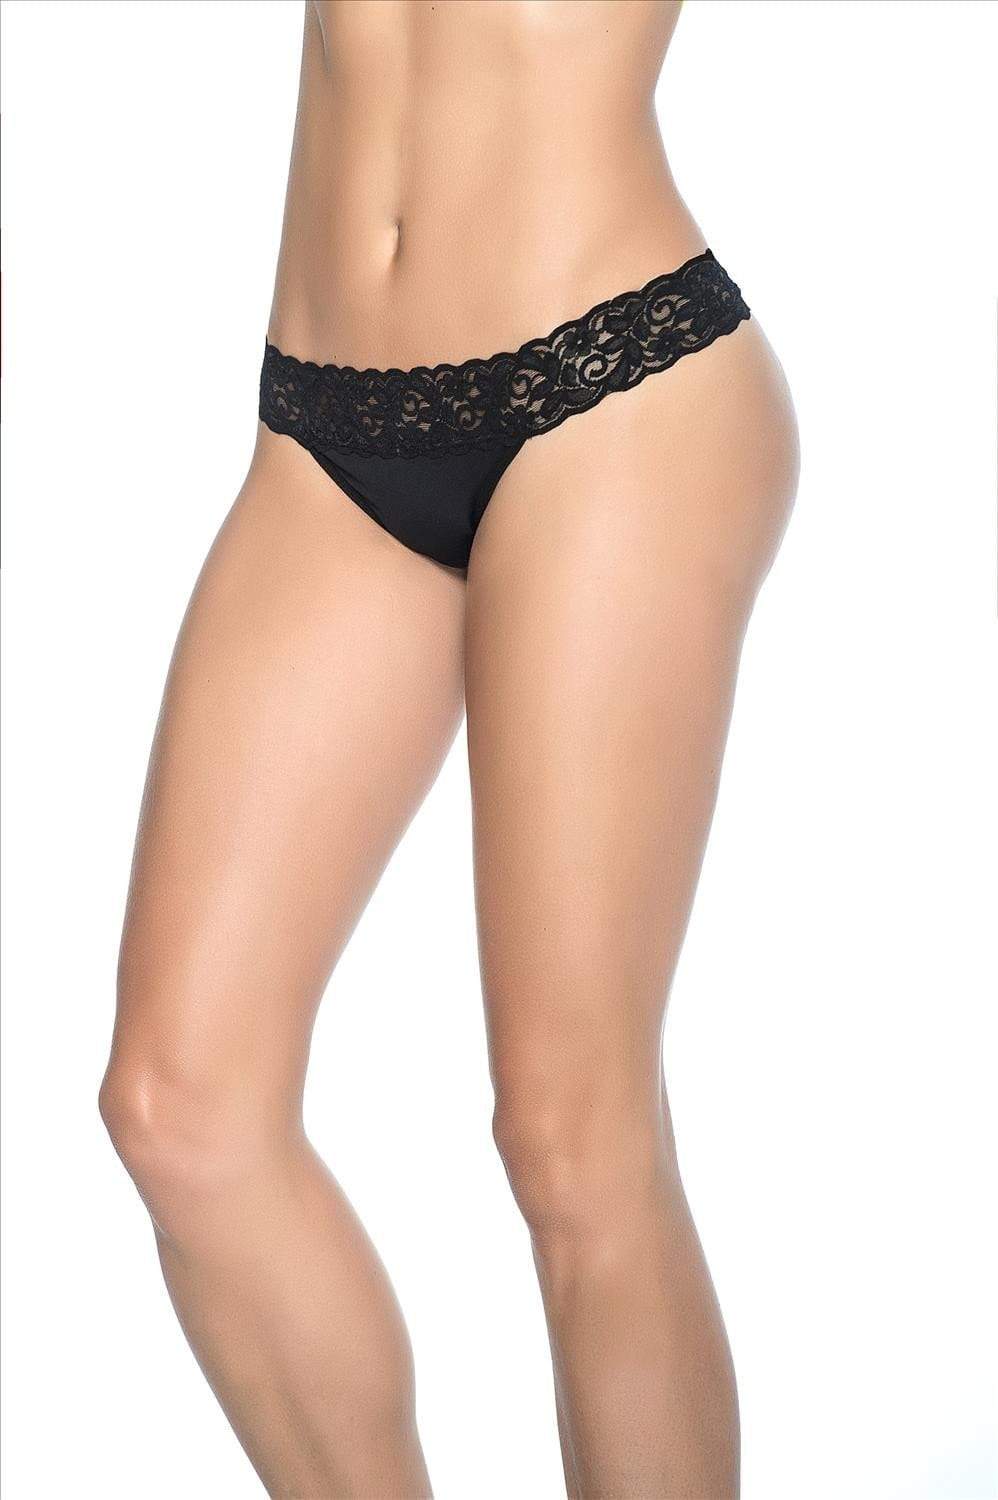 espiral Sexy Black Lace Thong Panty Underwear Lingerie  (Many Colors Available) Sexy Black Lace Thong Panty Underwear Lingerie  (Many Colors Available) Apparel &amp; Accessories &gt; Clothing &gt; Underwear &amp; Socks &gt; Underwear